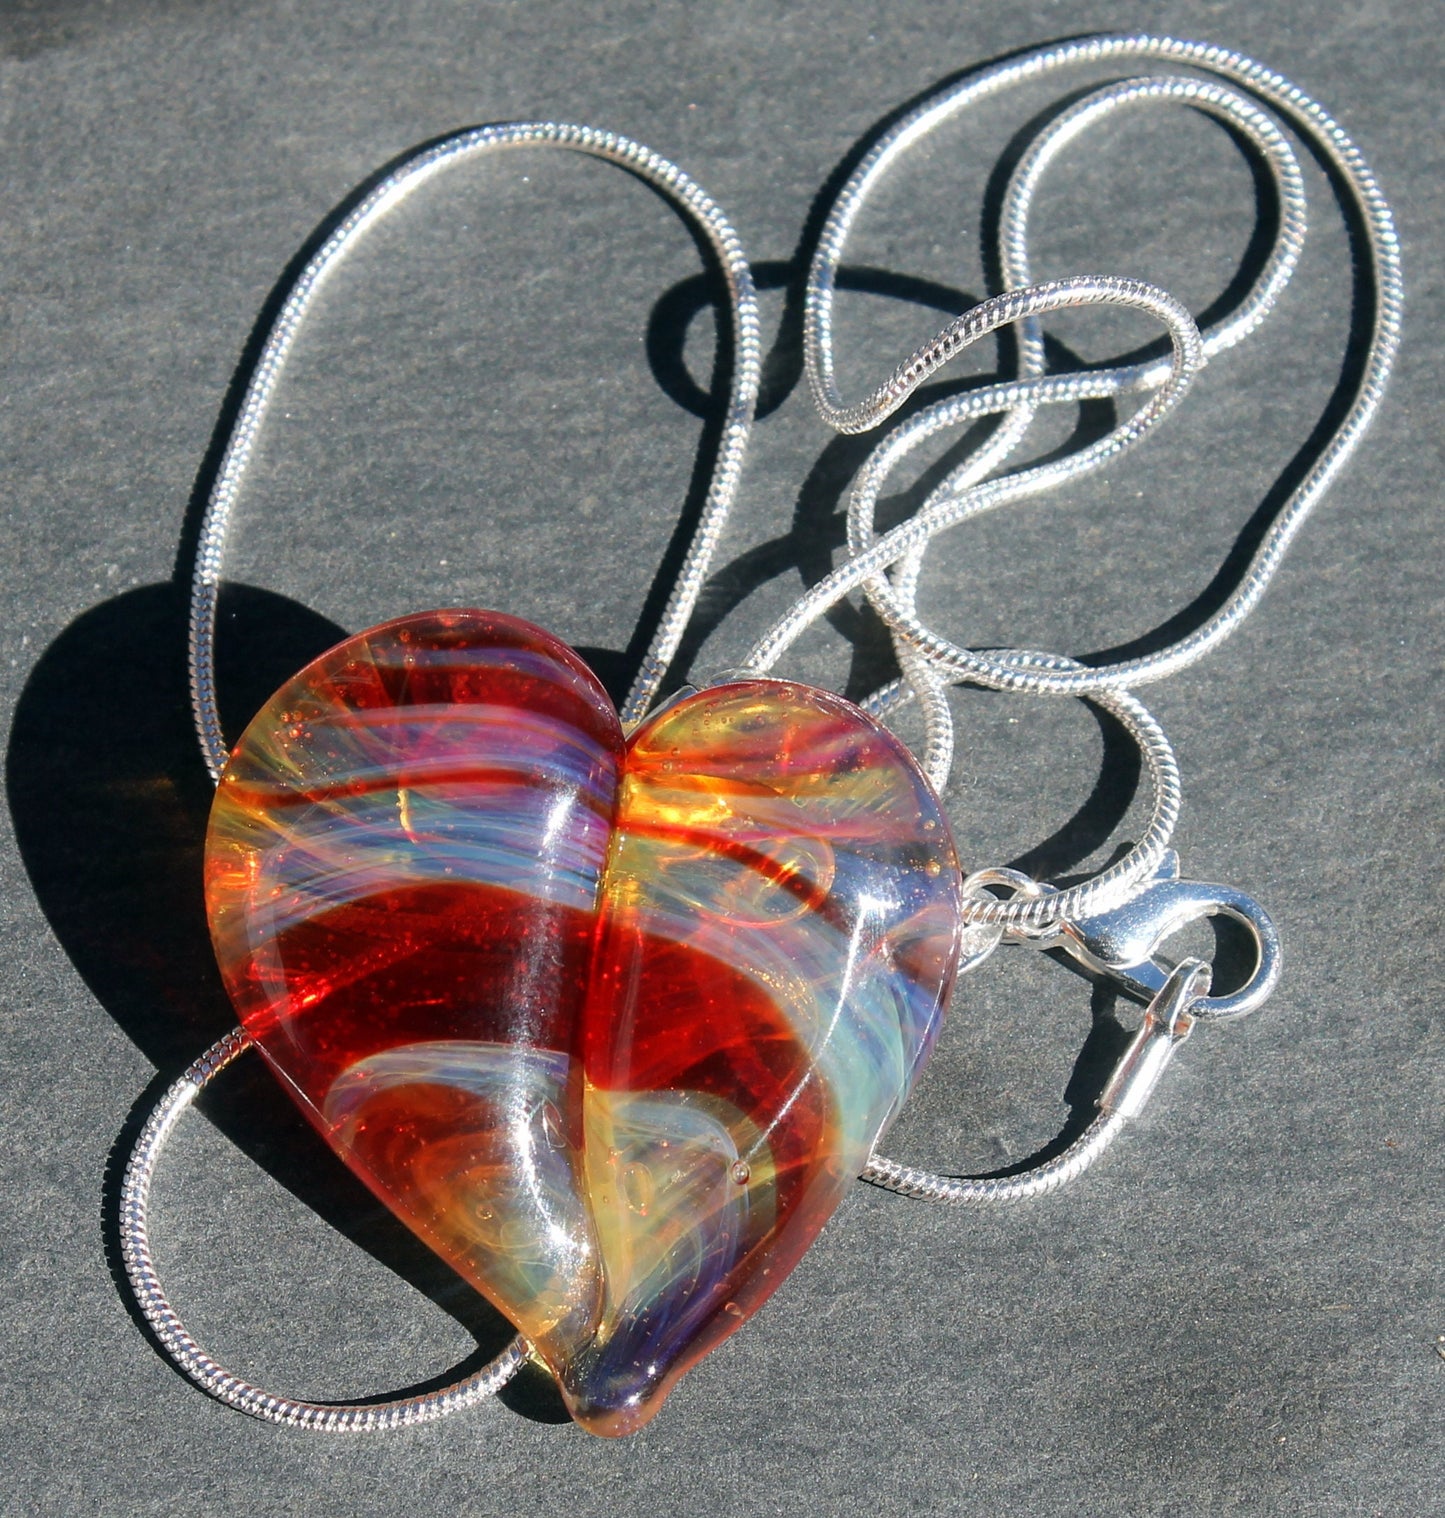 Red and Yellow Glass Heart